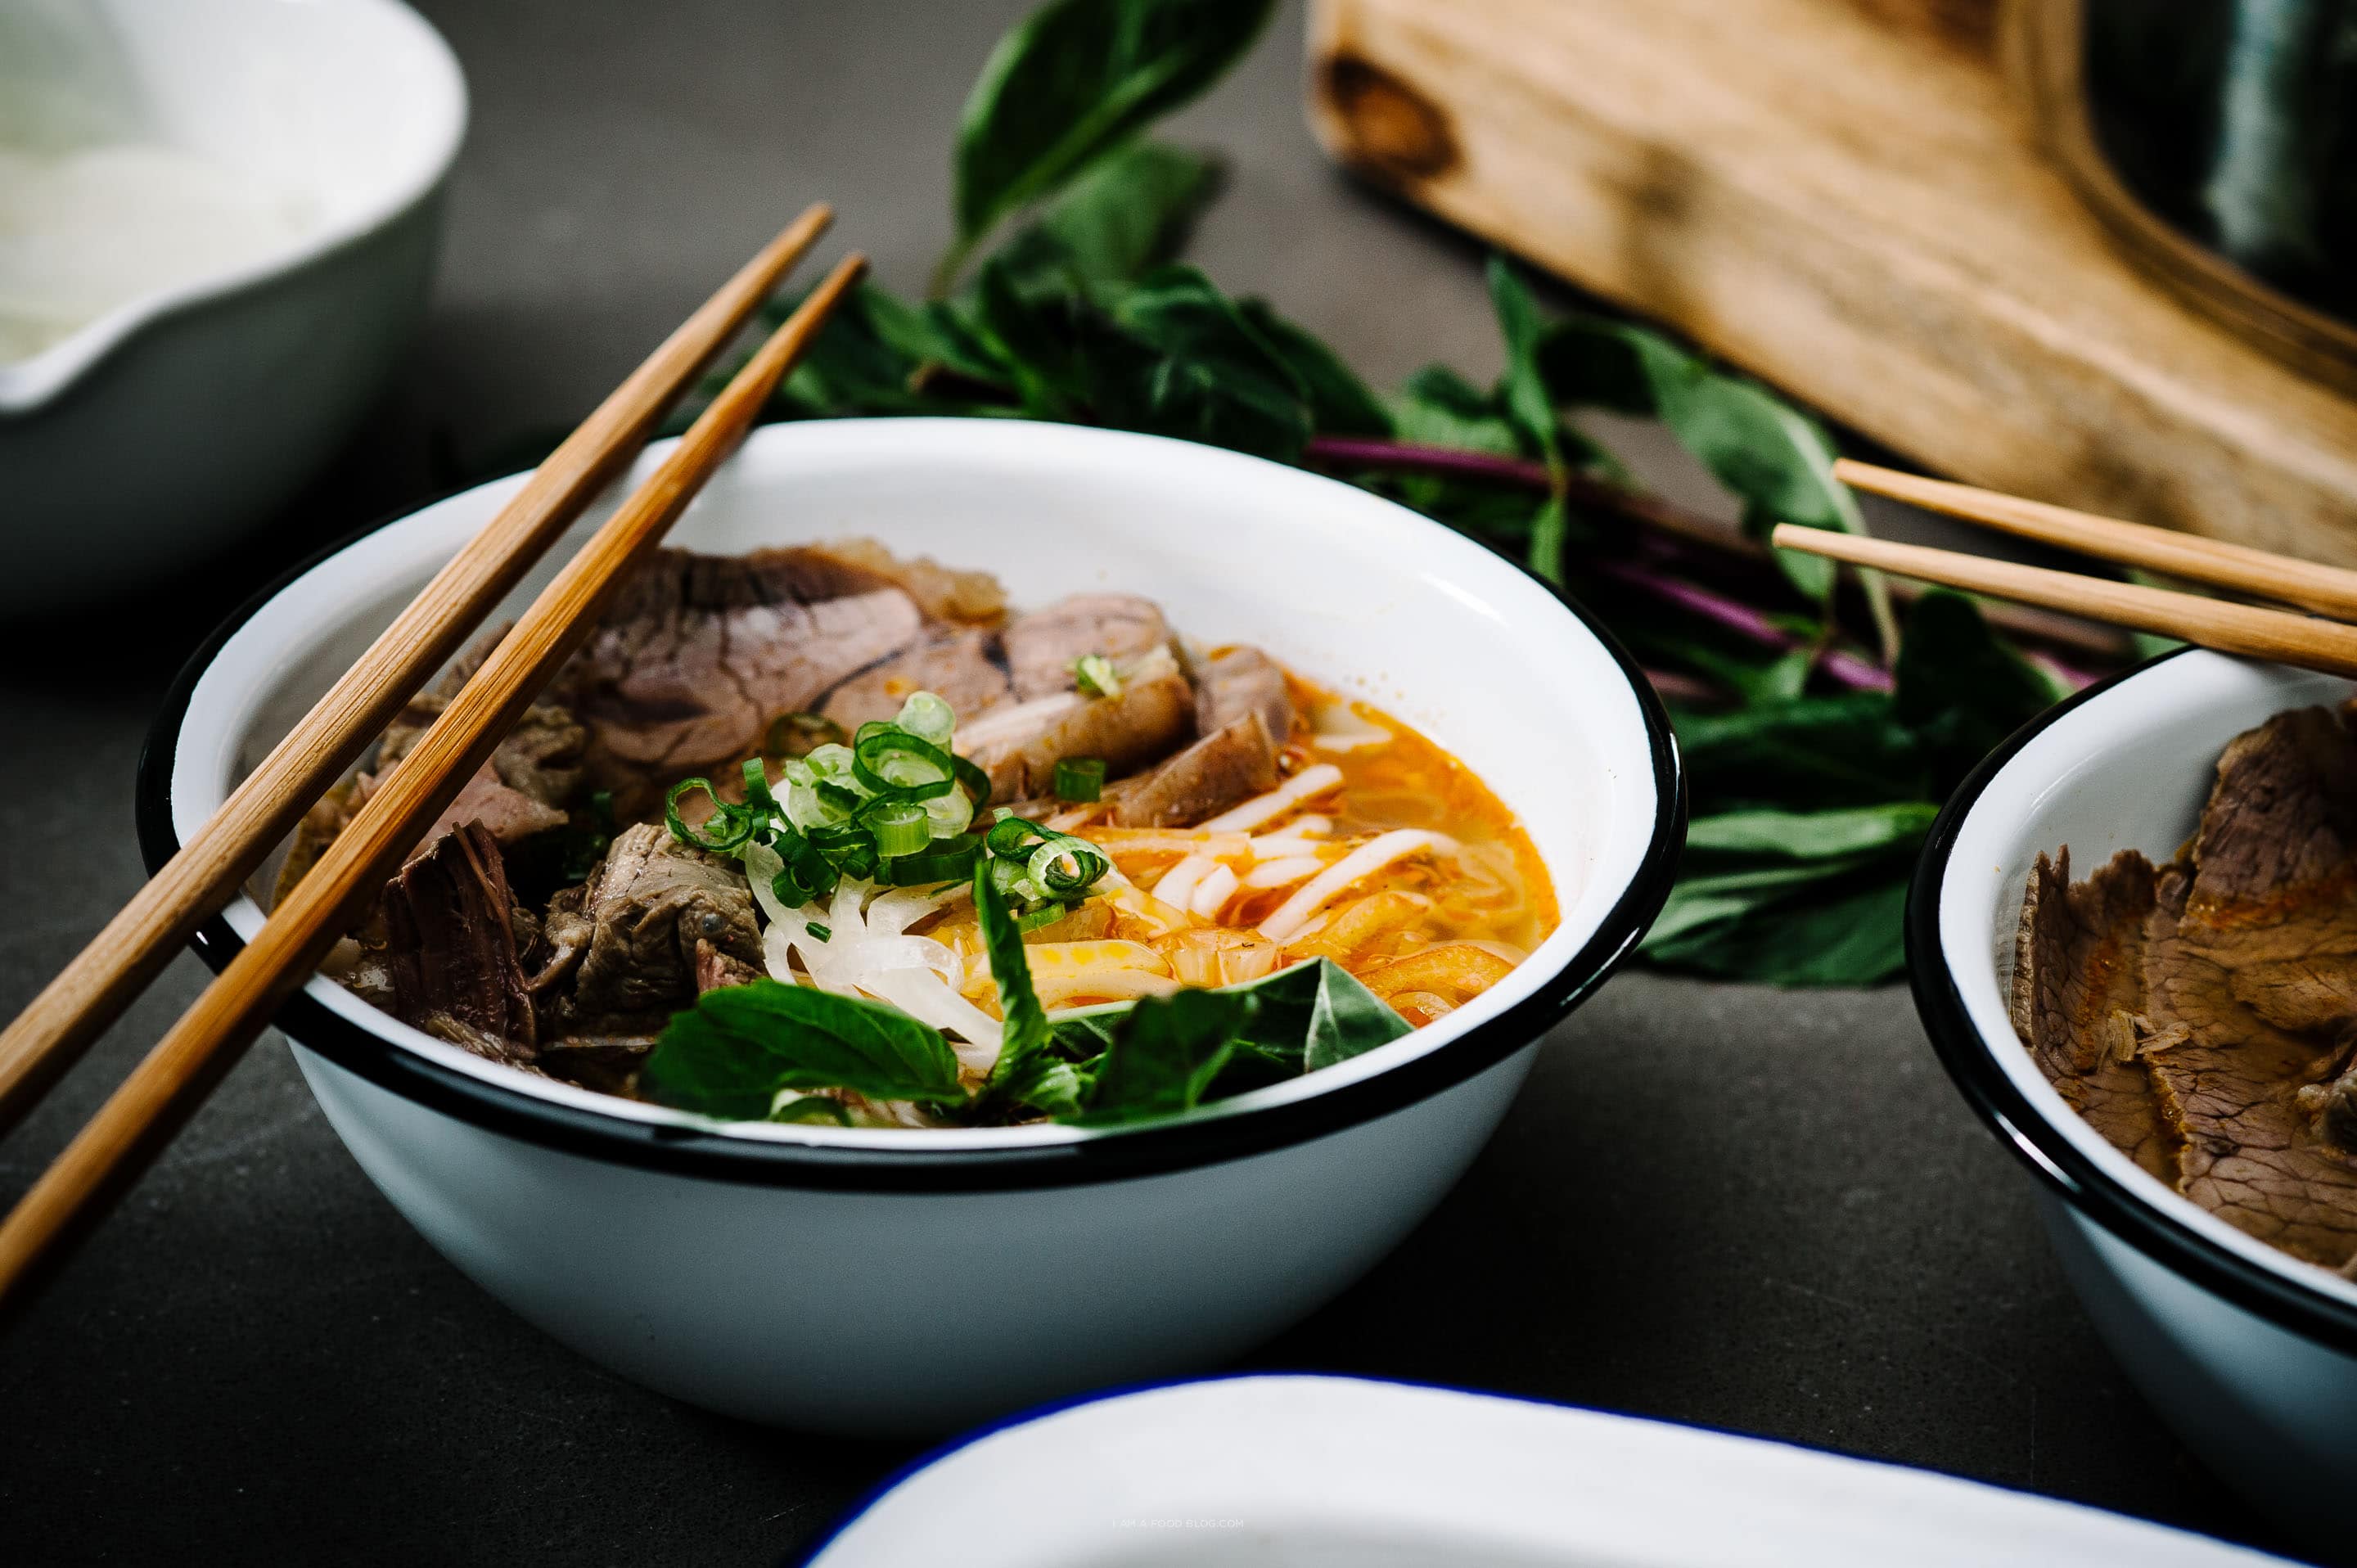 Bun Bo Hue: The Noodle Soup You Never Knew You Loved